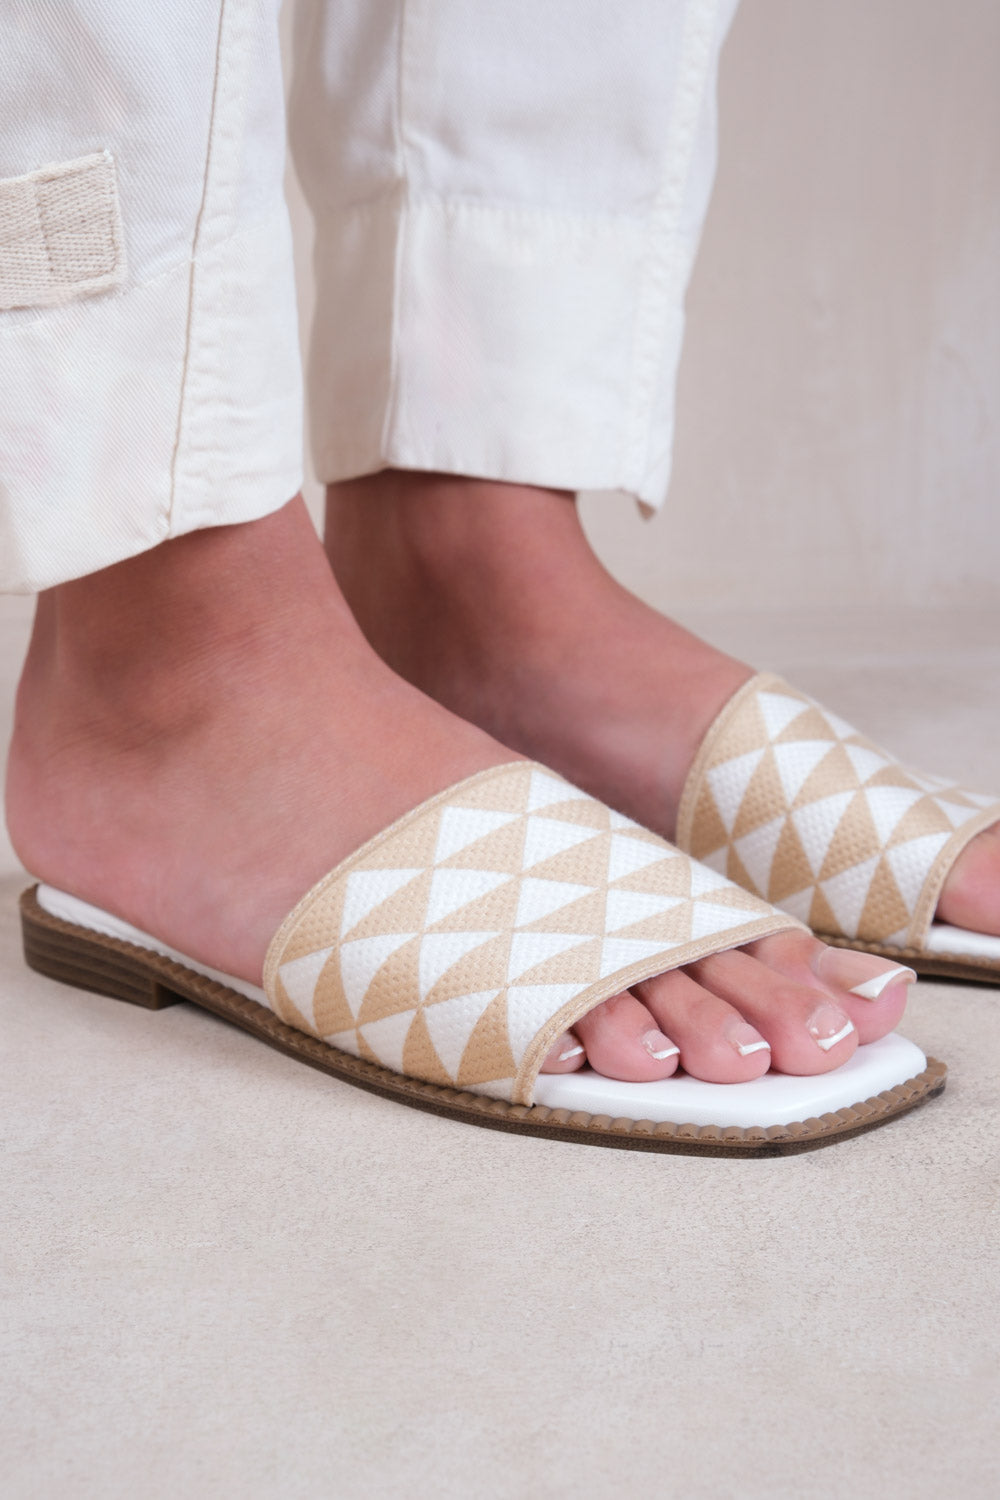 SYCAMORE FLAT SANDALS WITH TEXTURED SINGLE BAND IN NUDE FAUX LEATHER